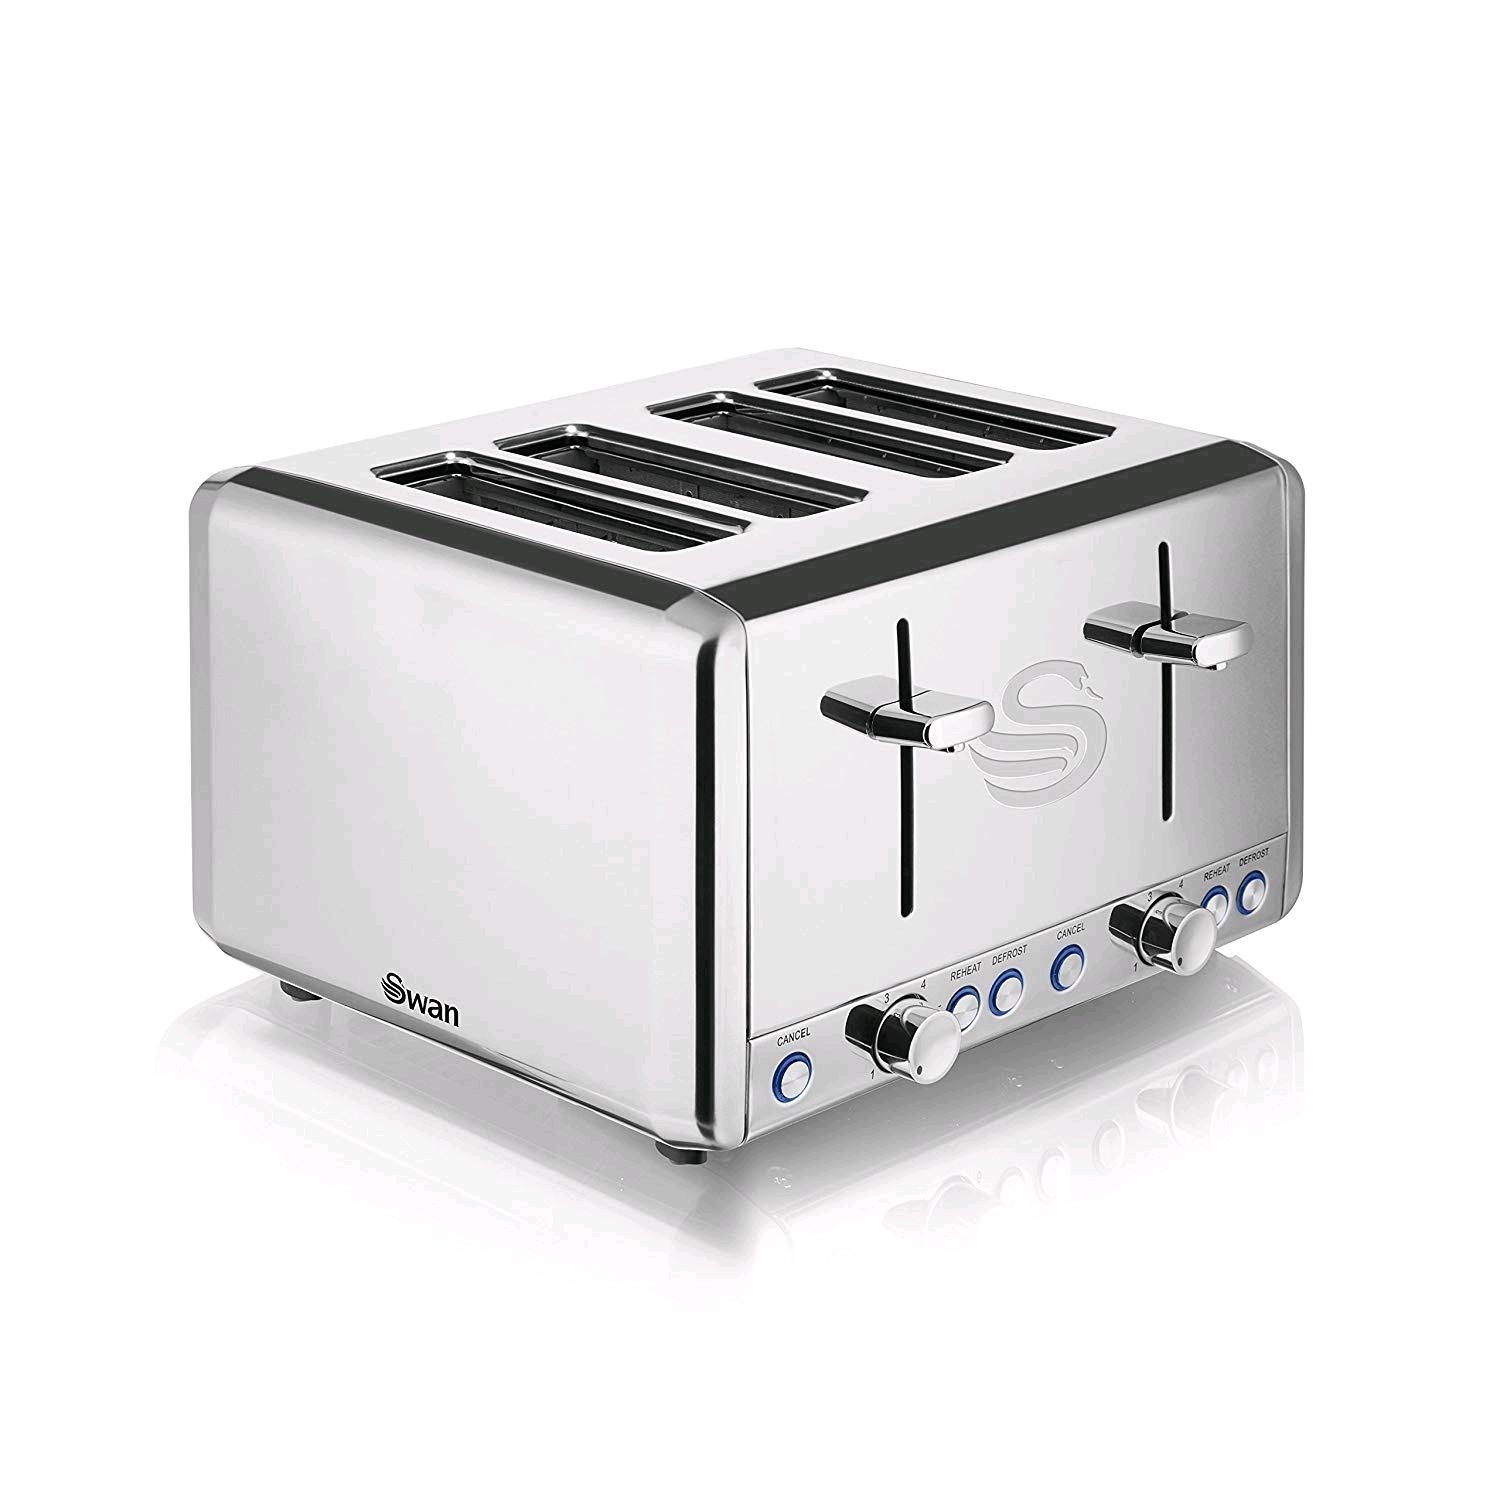 Swan 4 Slice Toaster in Polished Stainless Steel